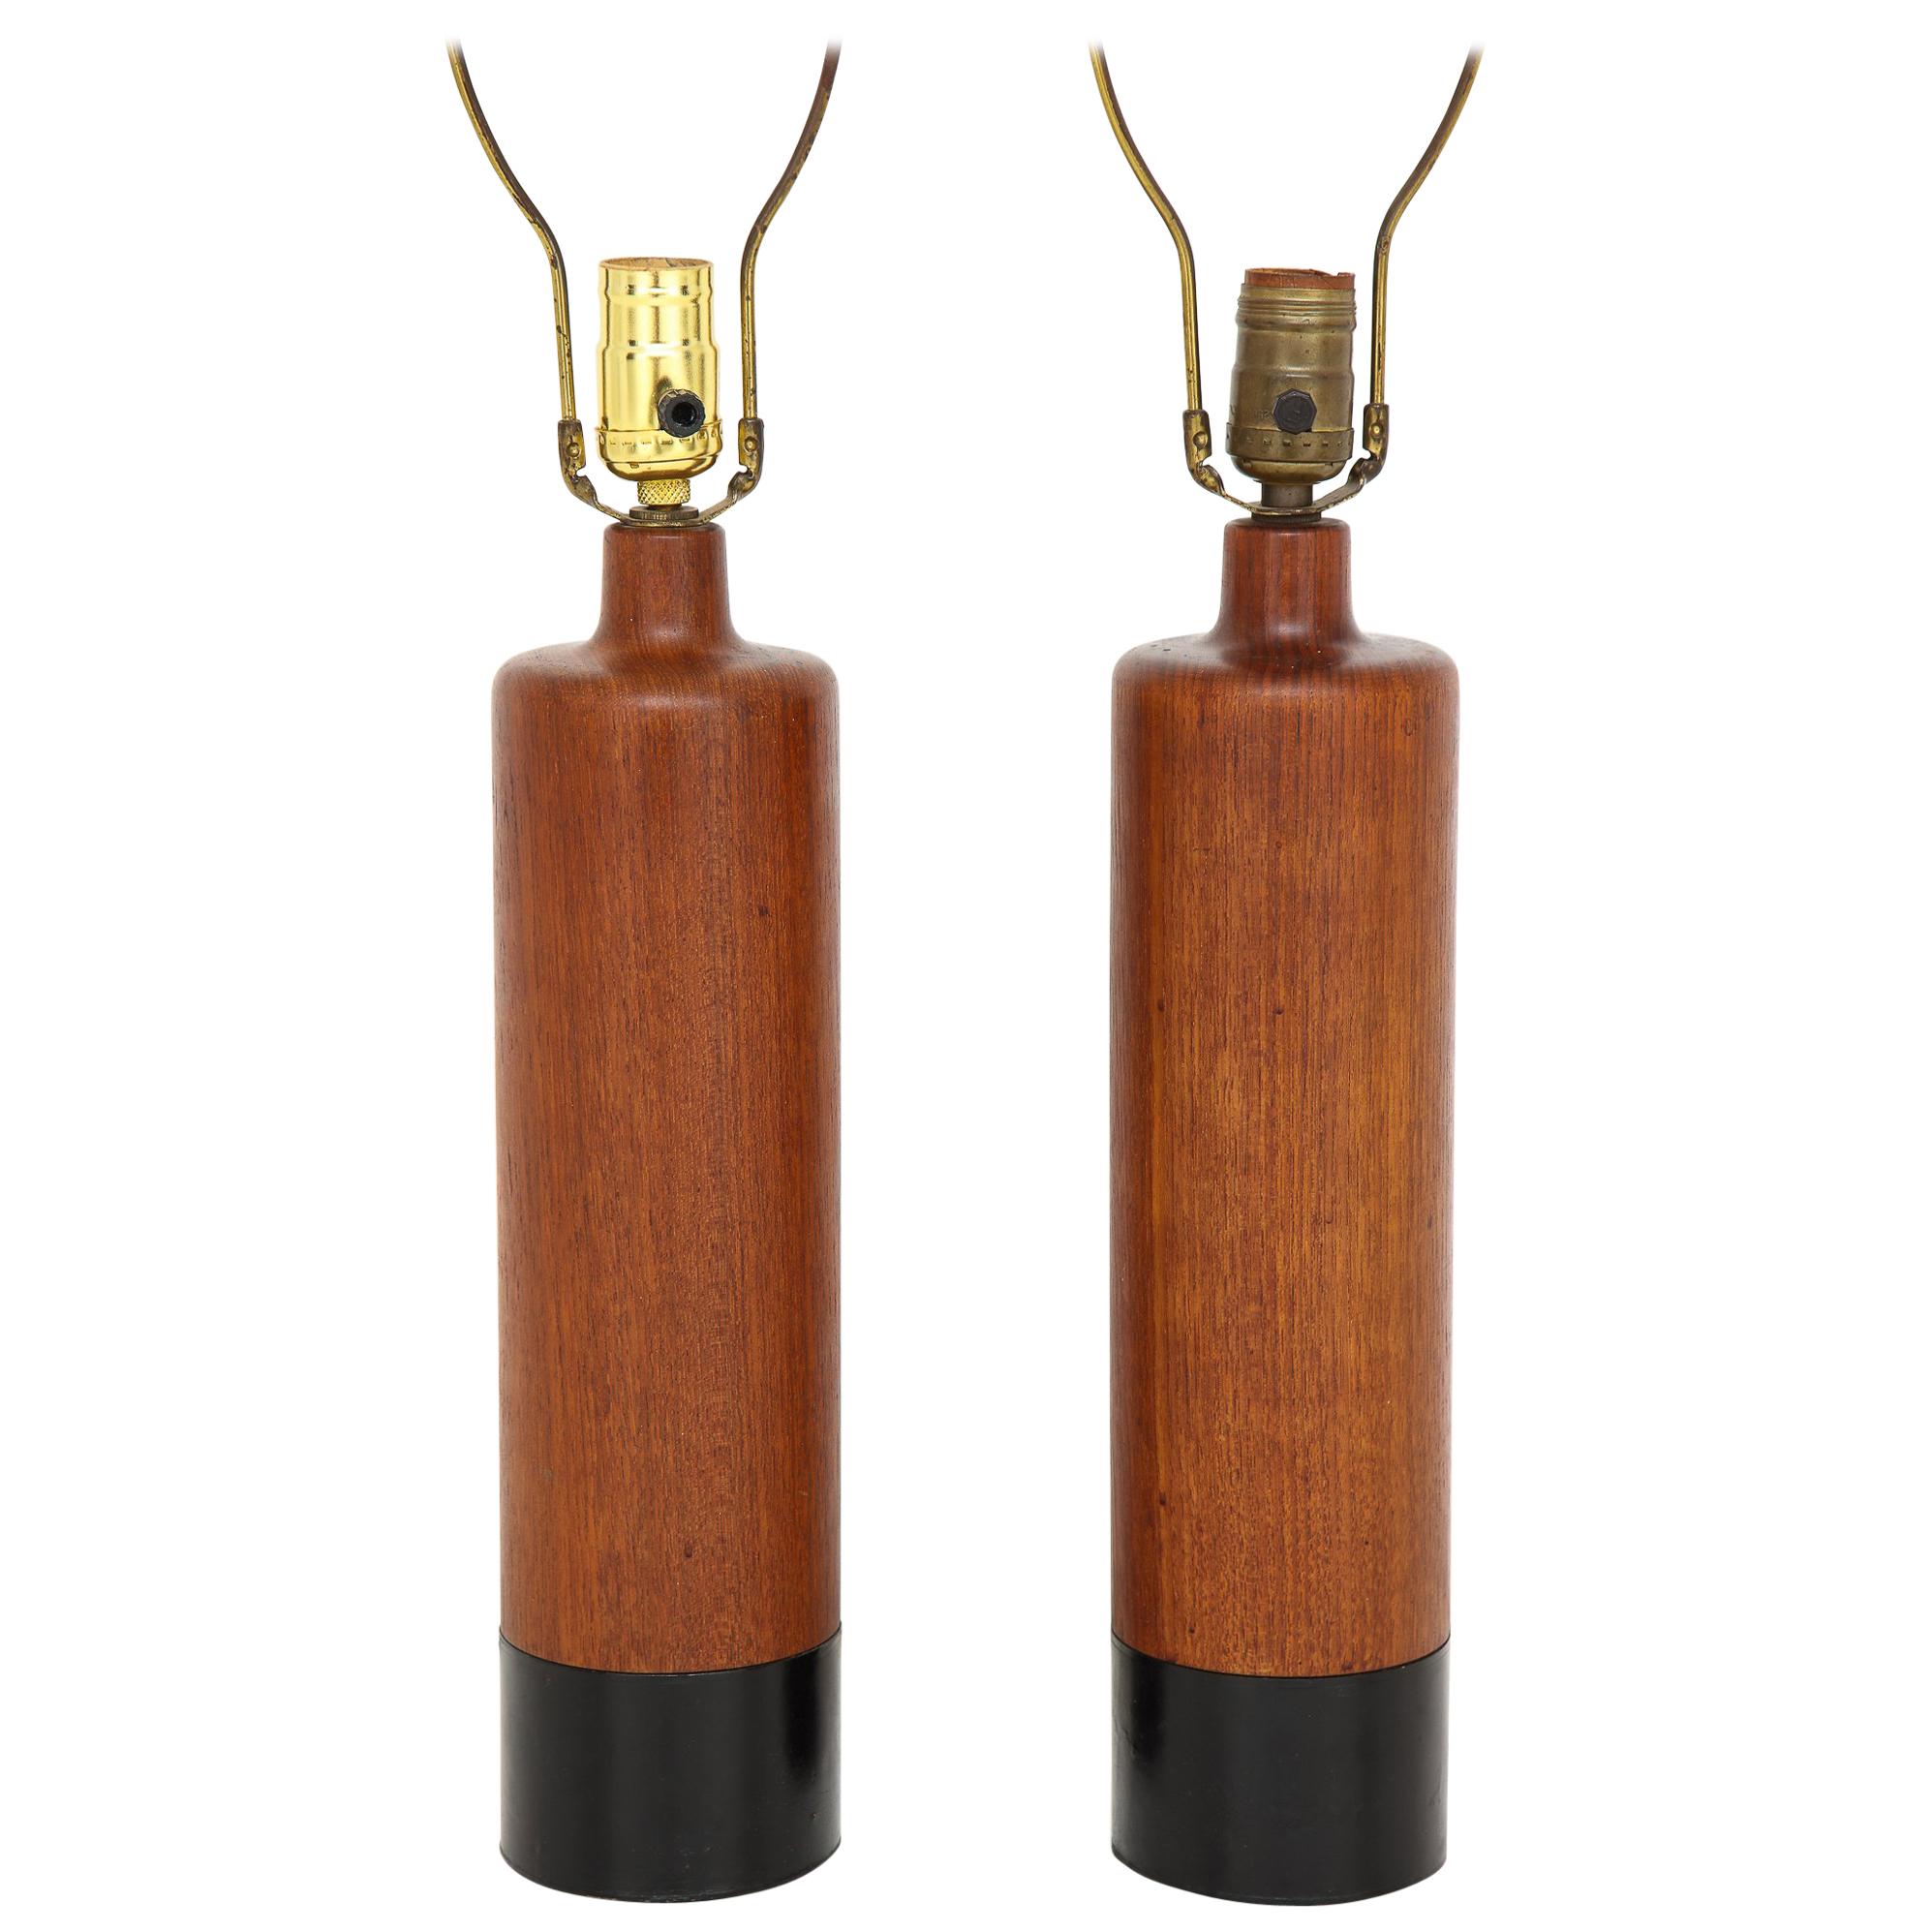 Pair of Teak and Leather Lamps by ESA